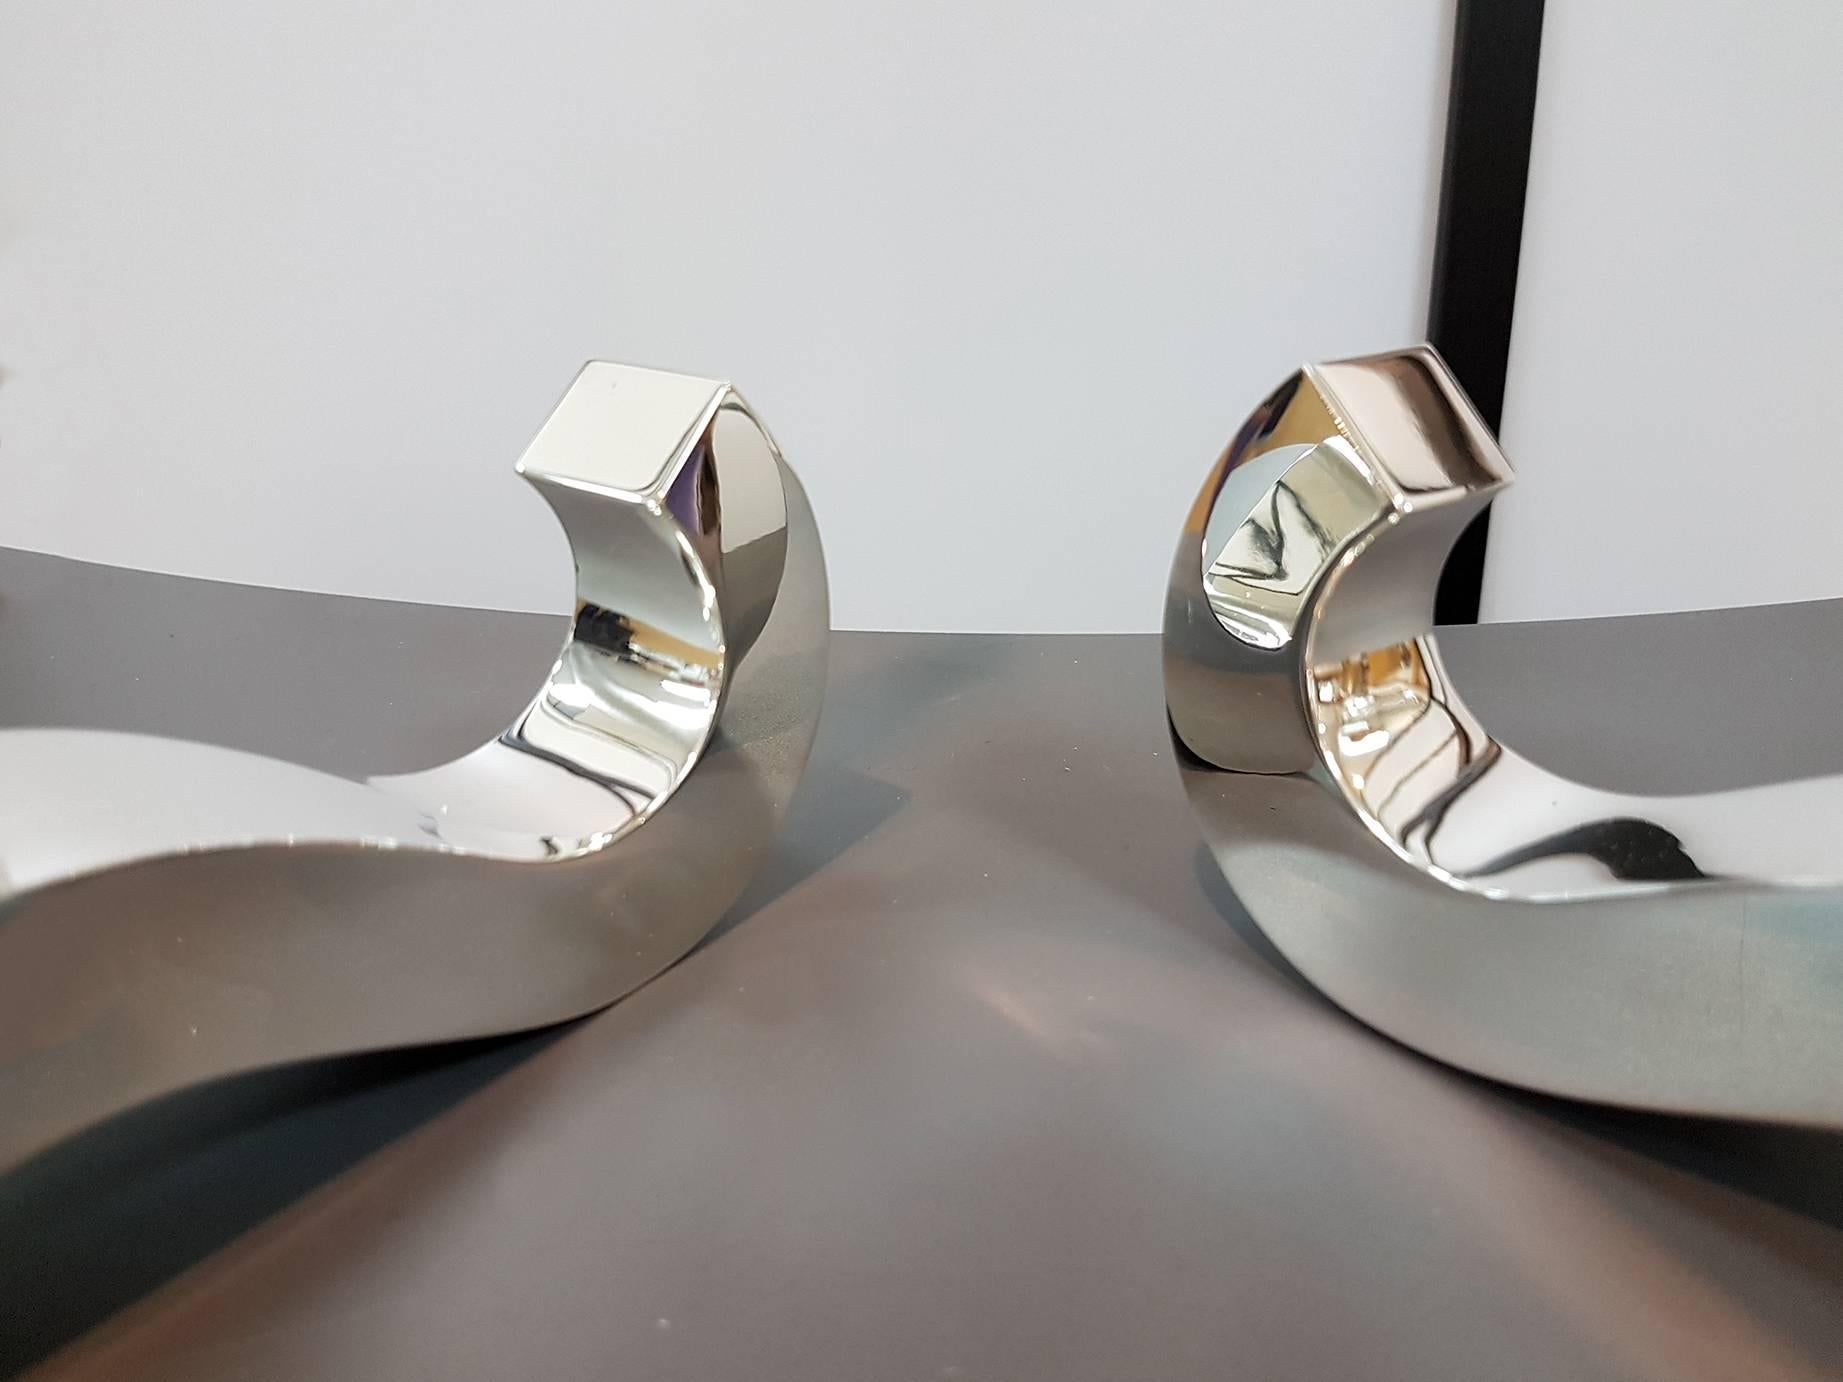 Pair of sterling silver candlisticks with one light.
The structure has been realized by a smooth sheet of silver.
The wave movement is realized with manufacturing by handmade.
On the top one rounds candle-holder are placed to complete the object
580